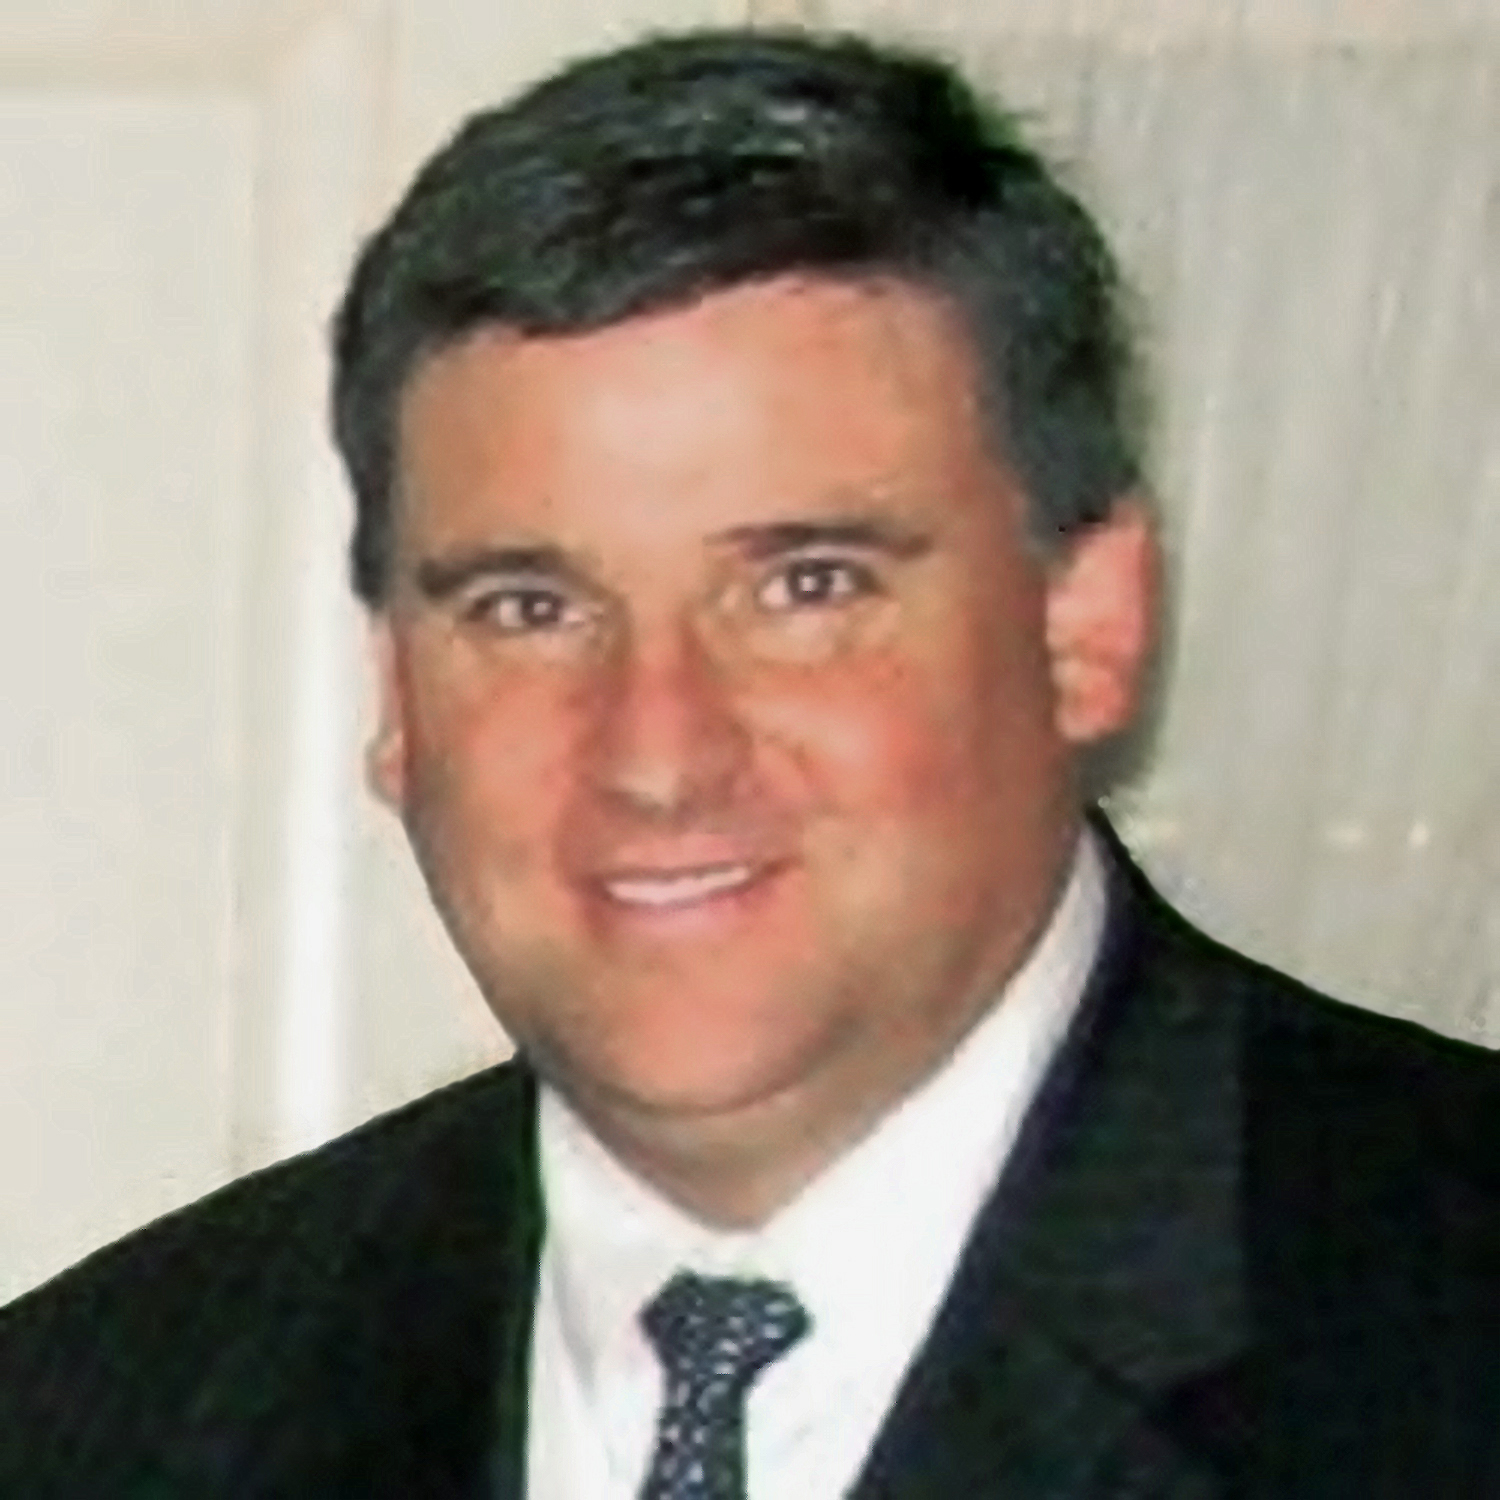 Charles Collins, Ed.D., is the executive director of Husson University's Southern Maine Campus.